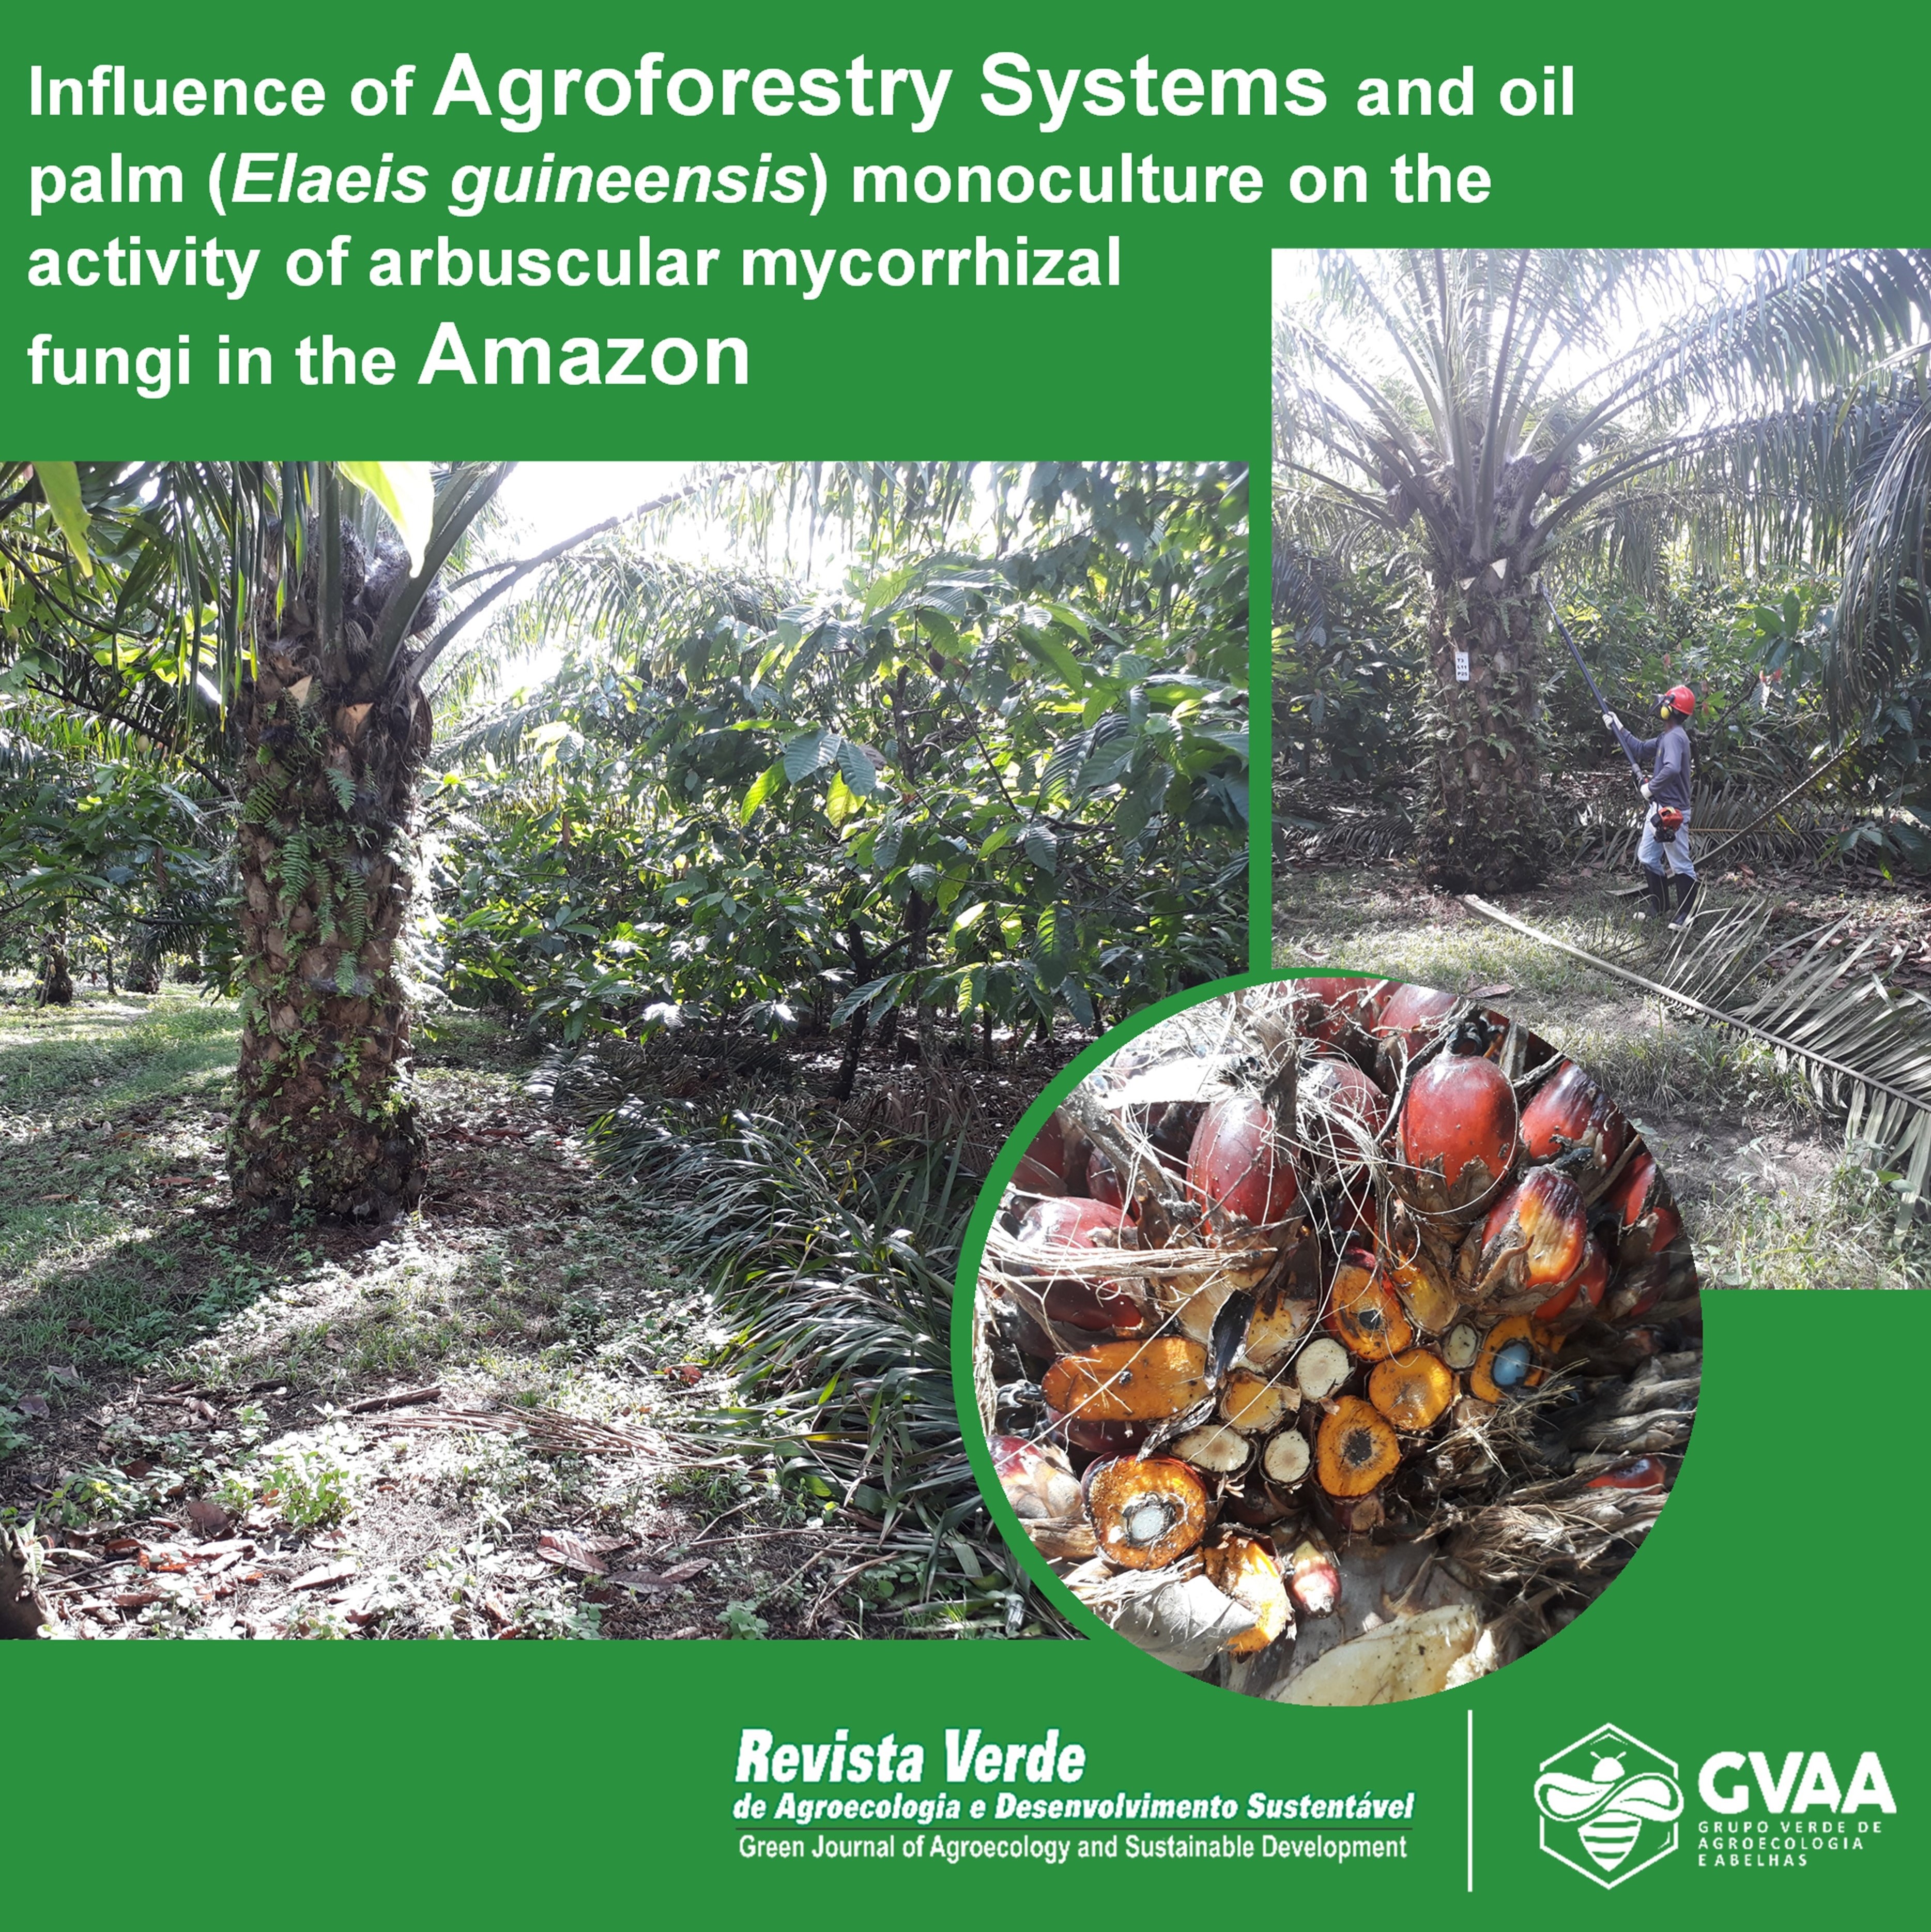 Influence of Agroforestry Systems and oil palm (Elaeis guineensis) monoculture on the activity of arbuscular mycorrhizal fungi in the Amazon